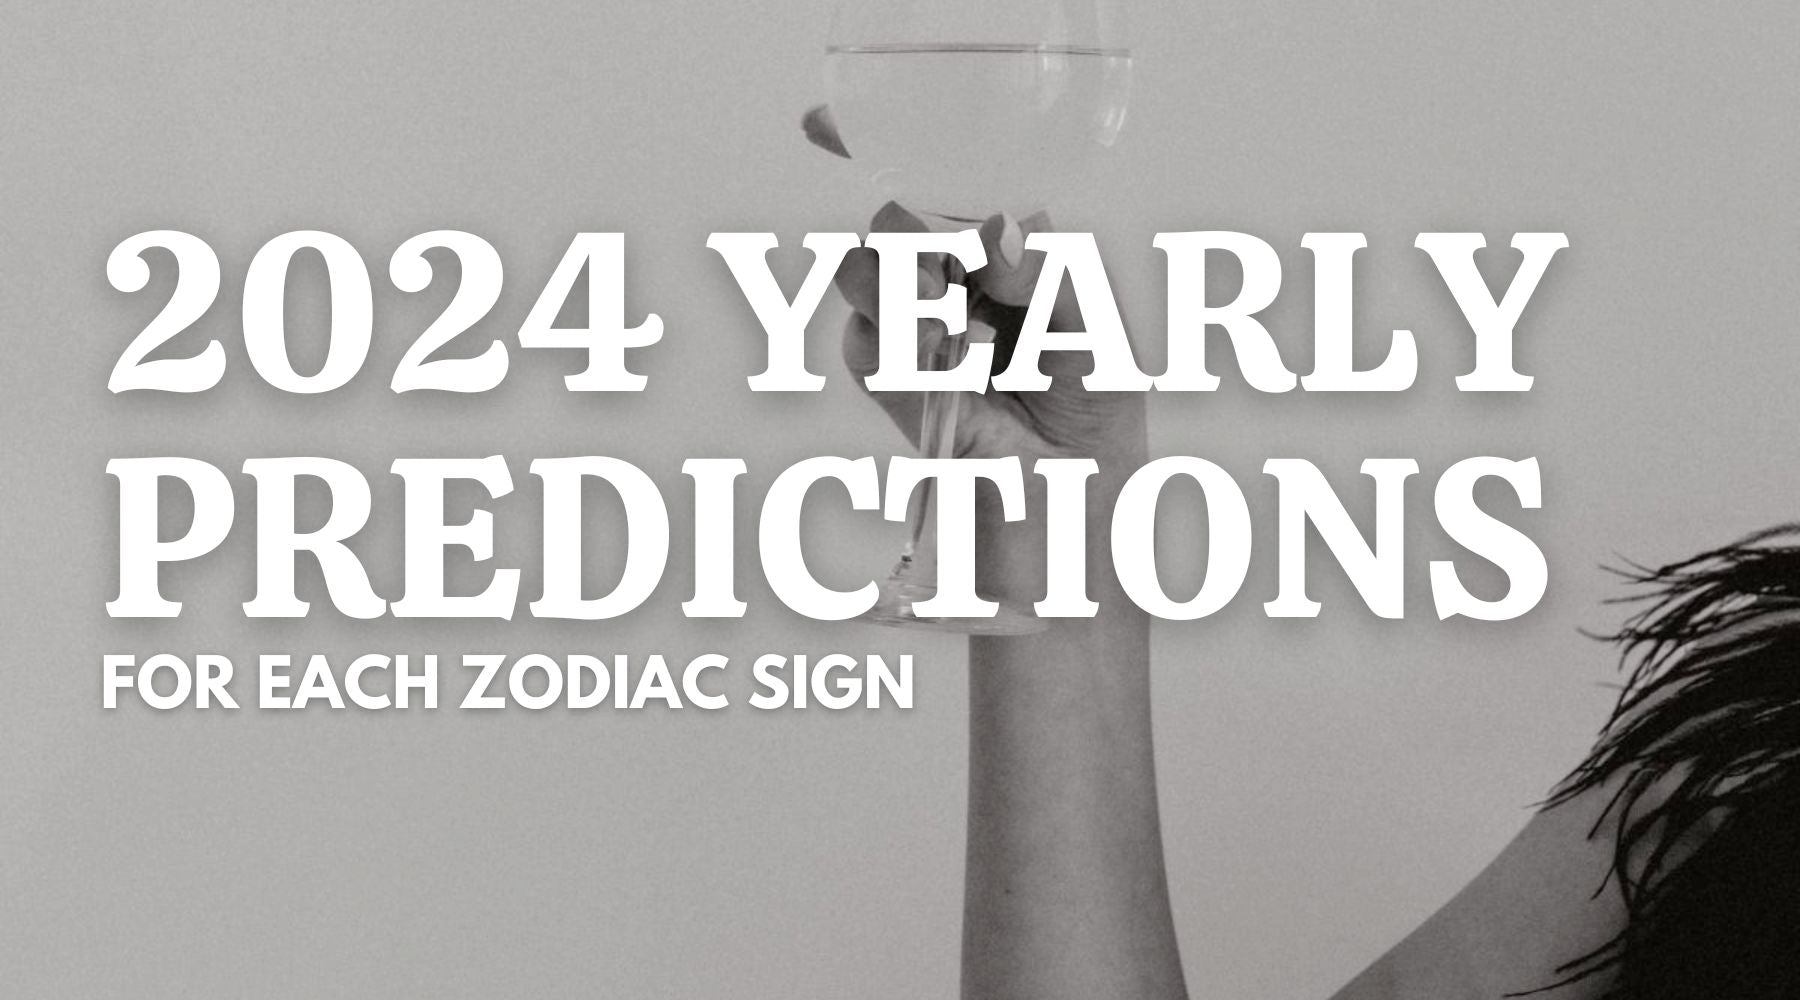 2024 for Zodiacs Prediction-How lucky are you going to get?